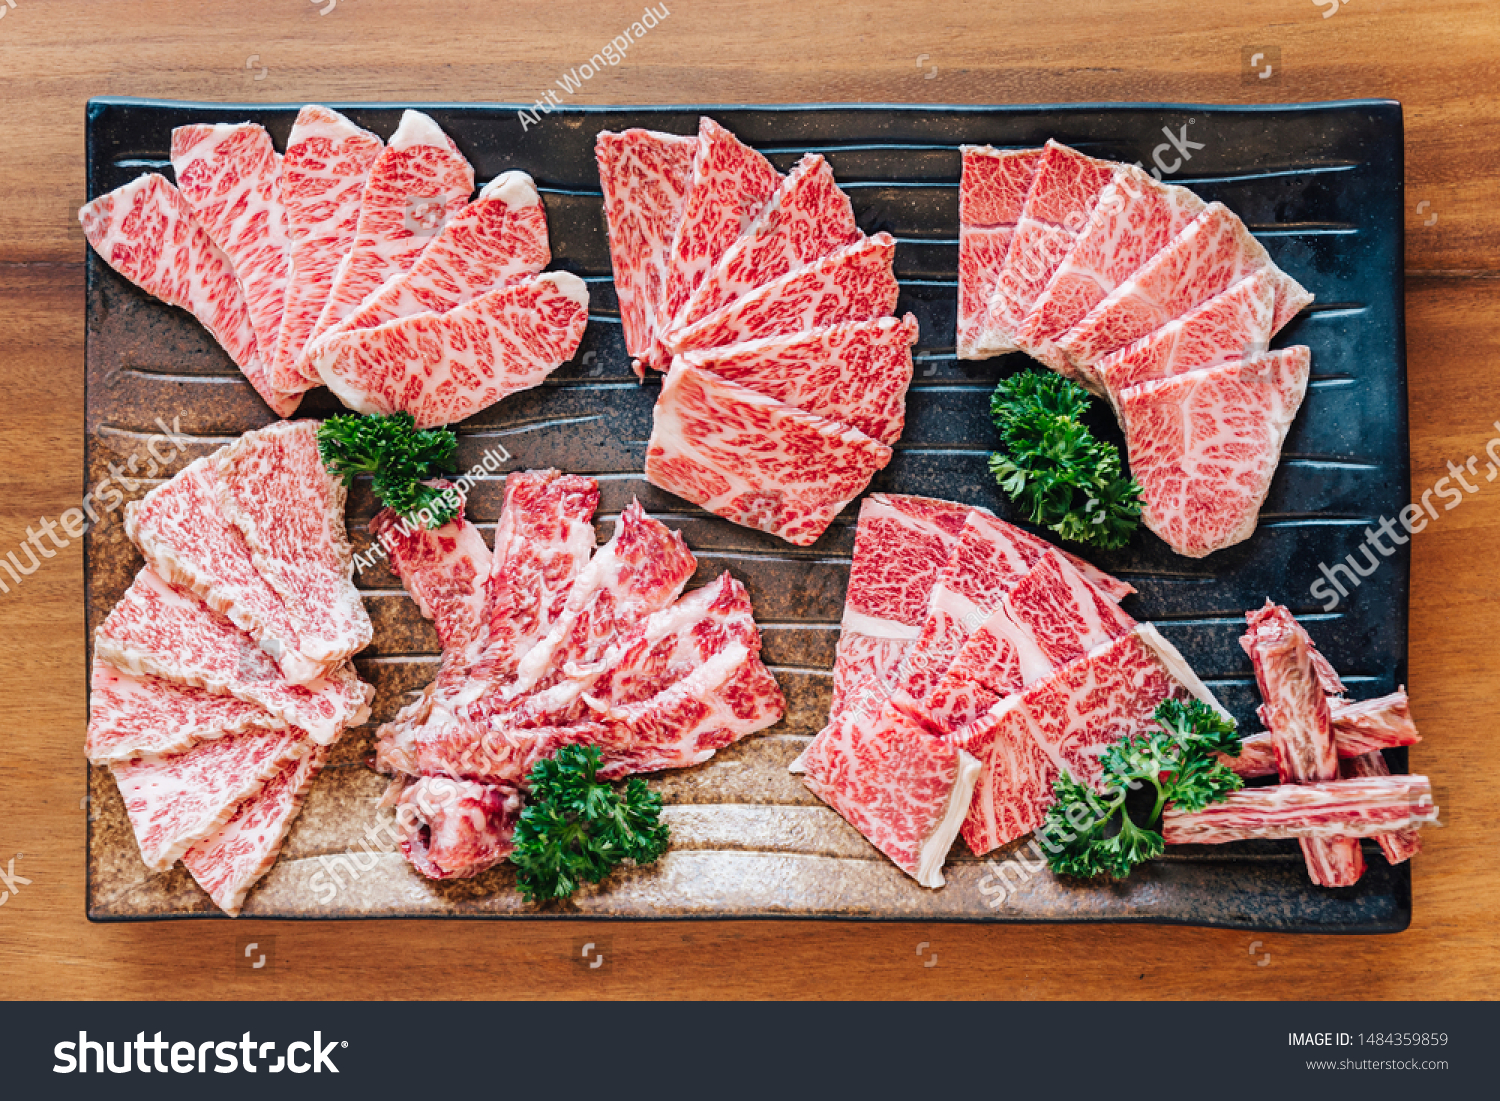 Top view of Premium Rare Slices many parts of Wagyu A5 beef with high-marbled texture on stone plate served for Yakiniku (Grilled Meat). #1484359859